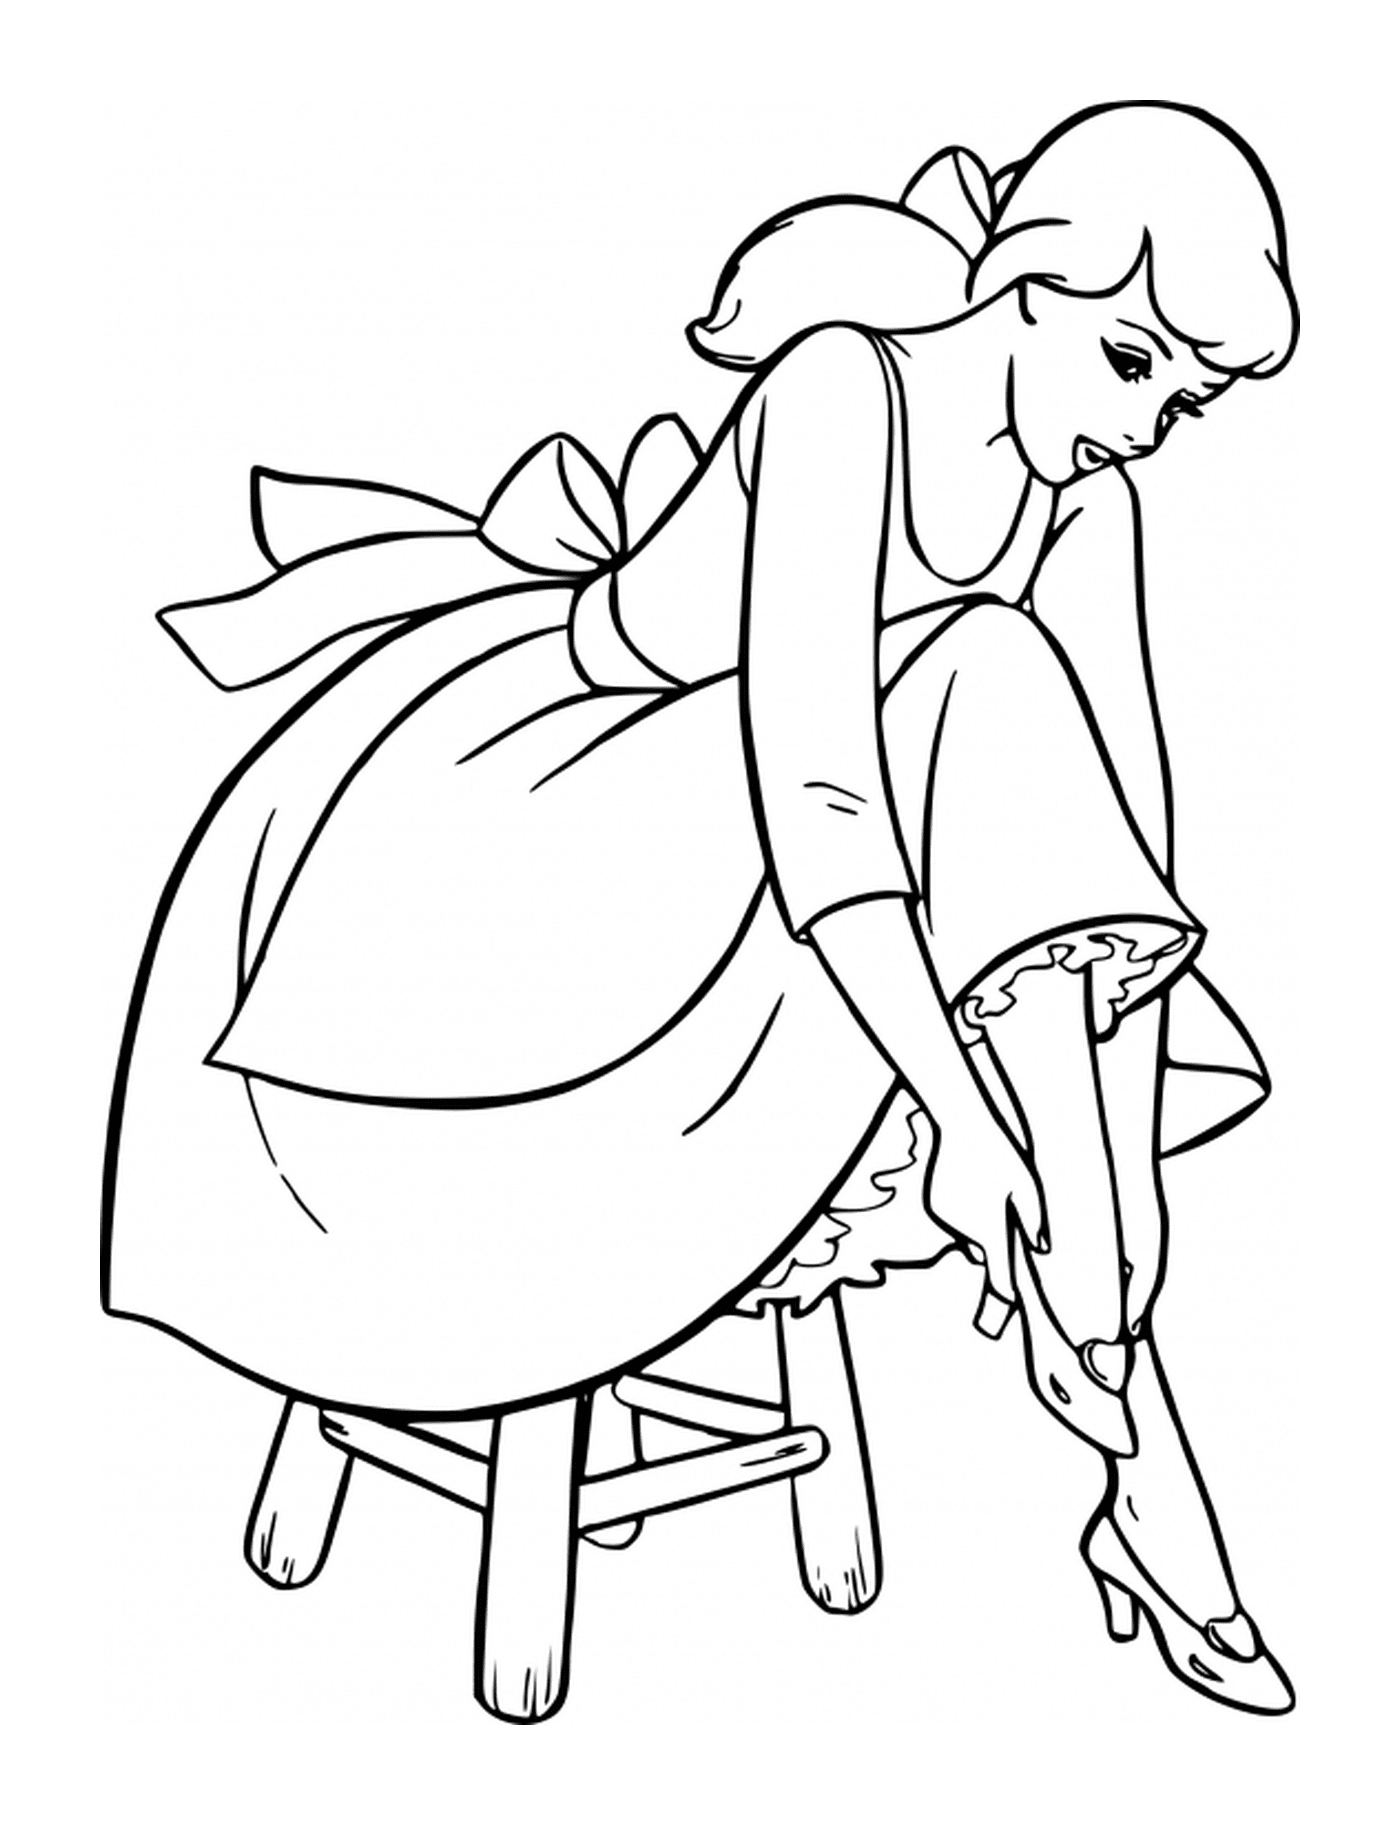  Cinderella putting her shoe on a stool 